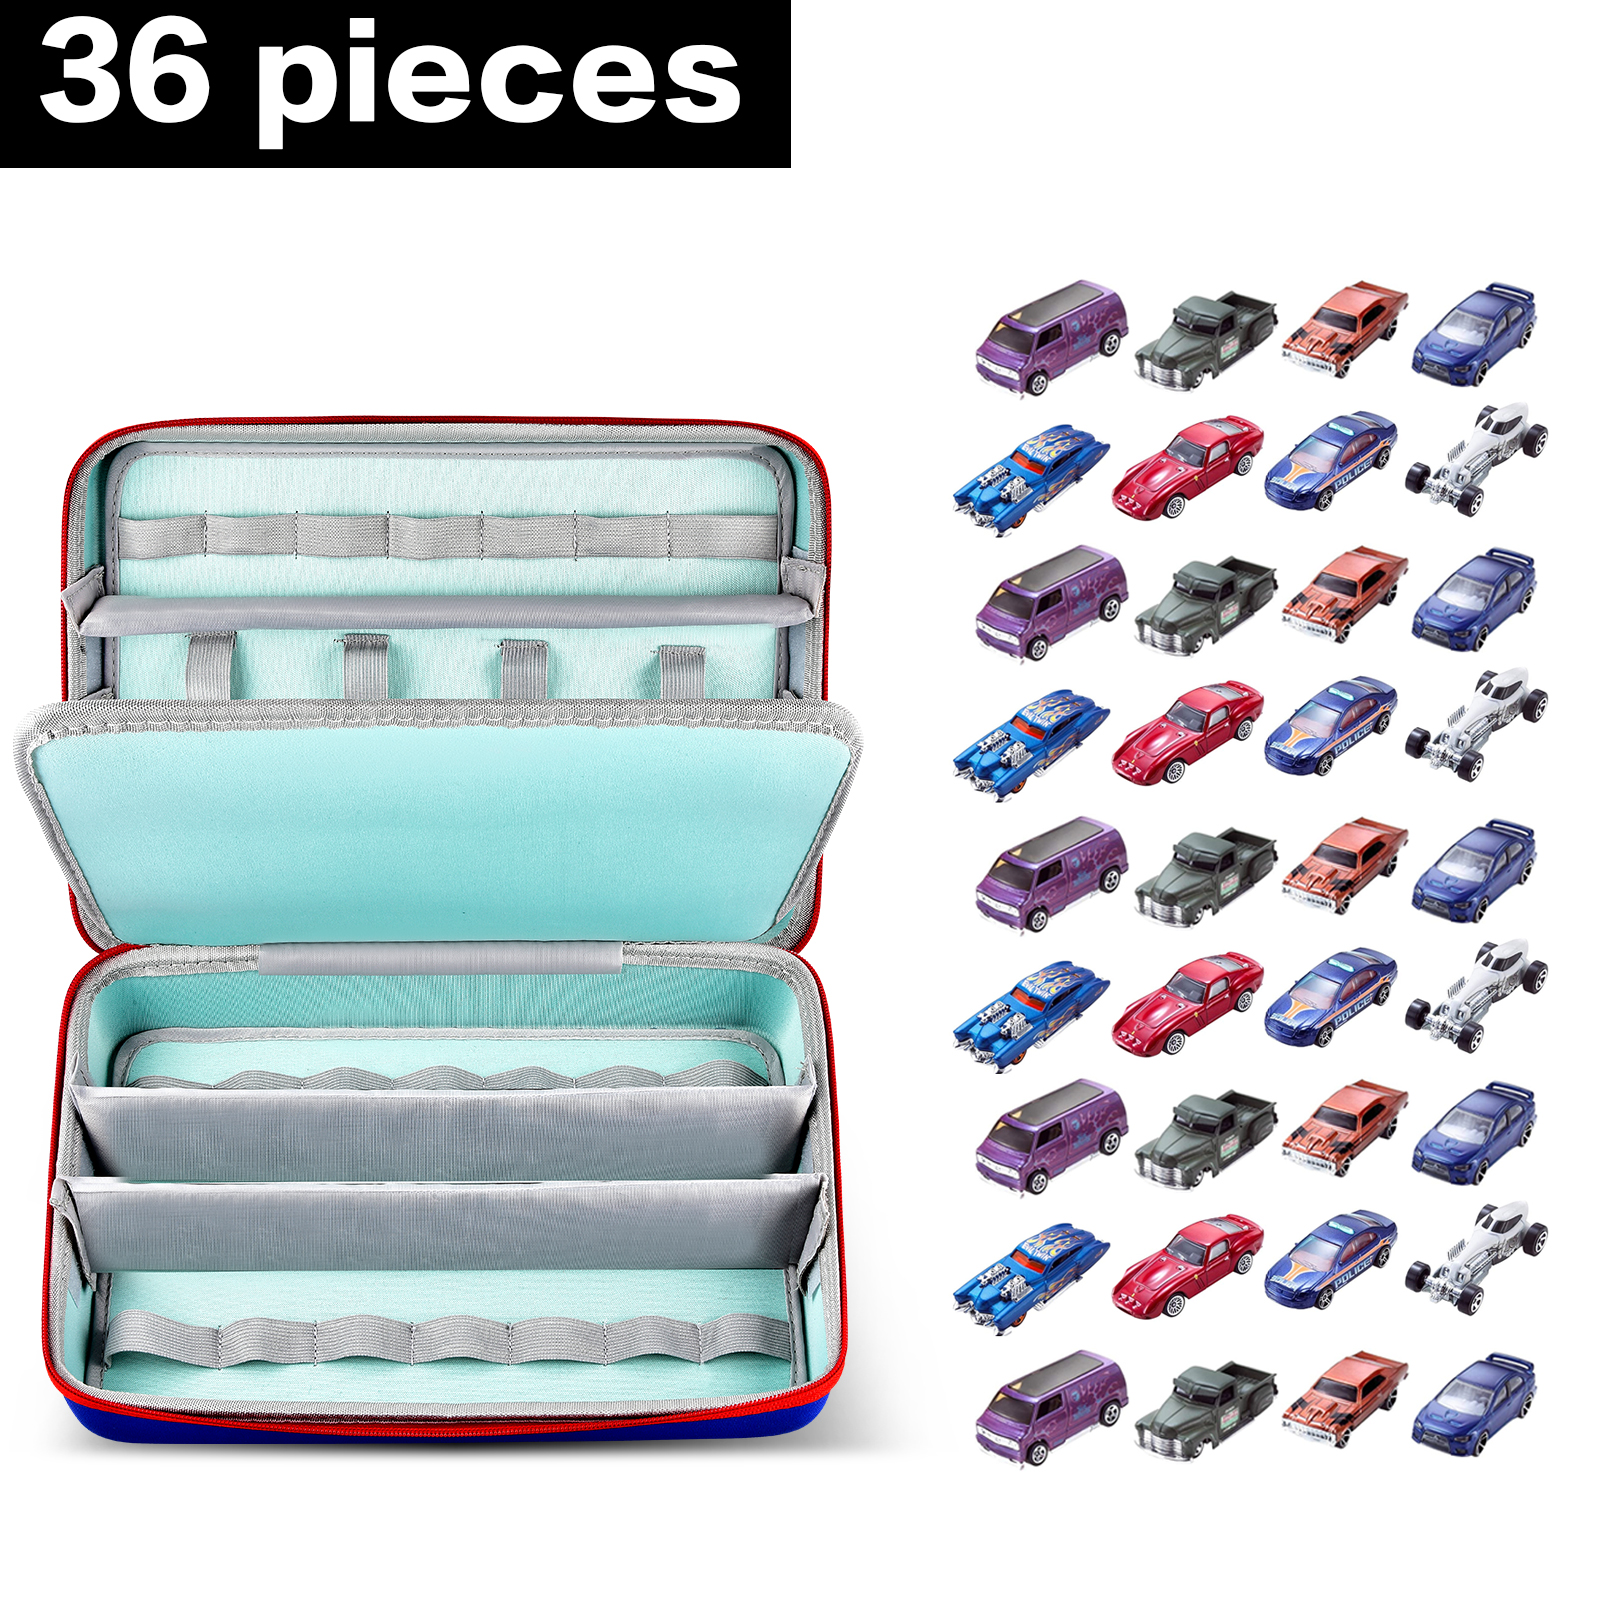 Gwcase Toy Car Organizer Case for Hotwheels Cars/ for Matchbox Cars Holds 36pcs Cars, Box Only, Size: One size, Blue